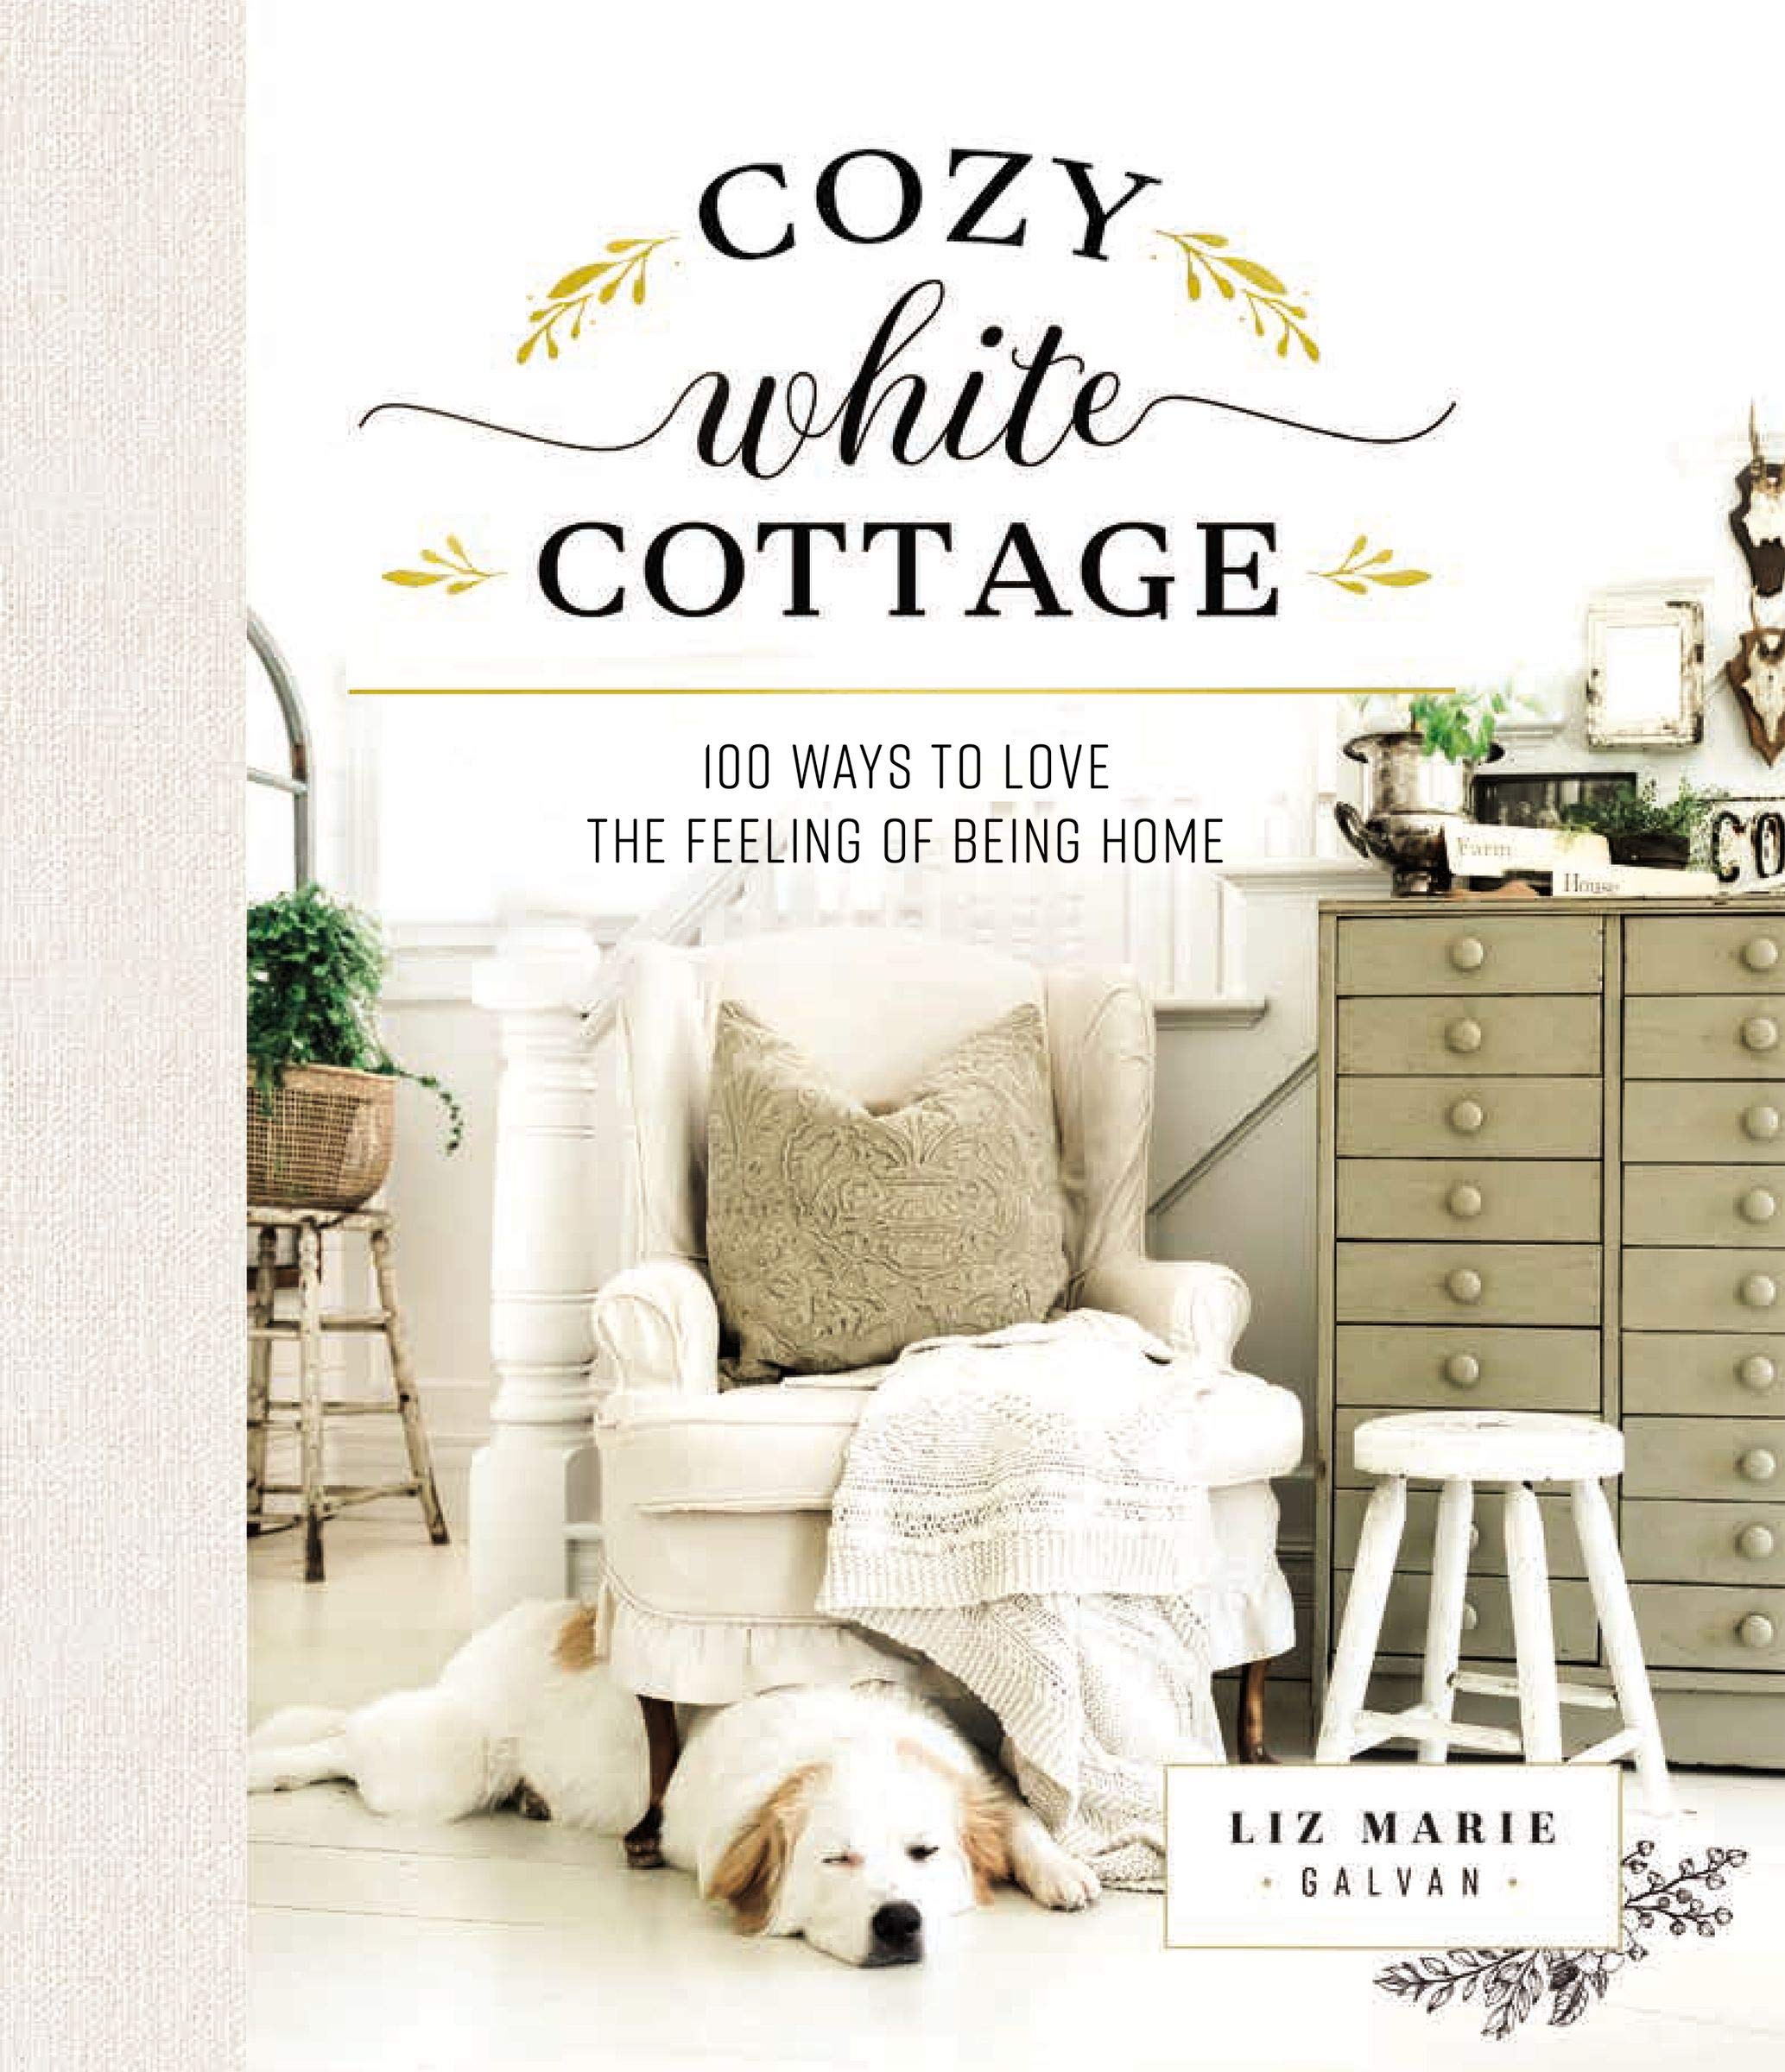 Image for "Cozy White Cottage"